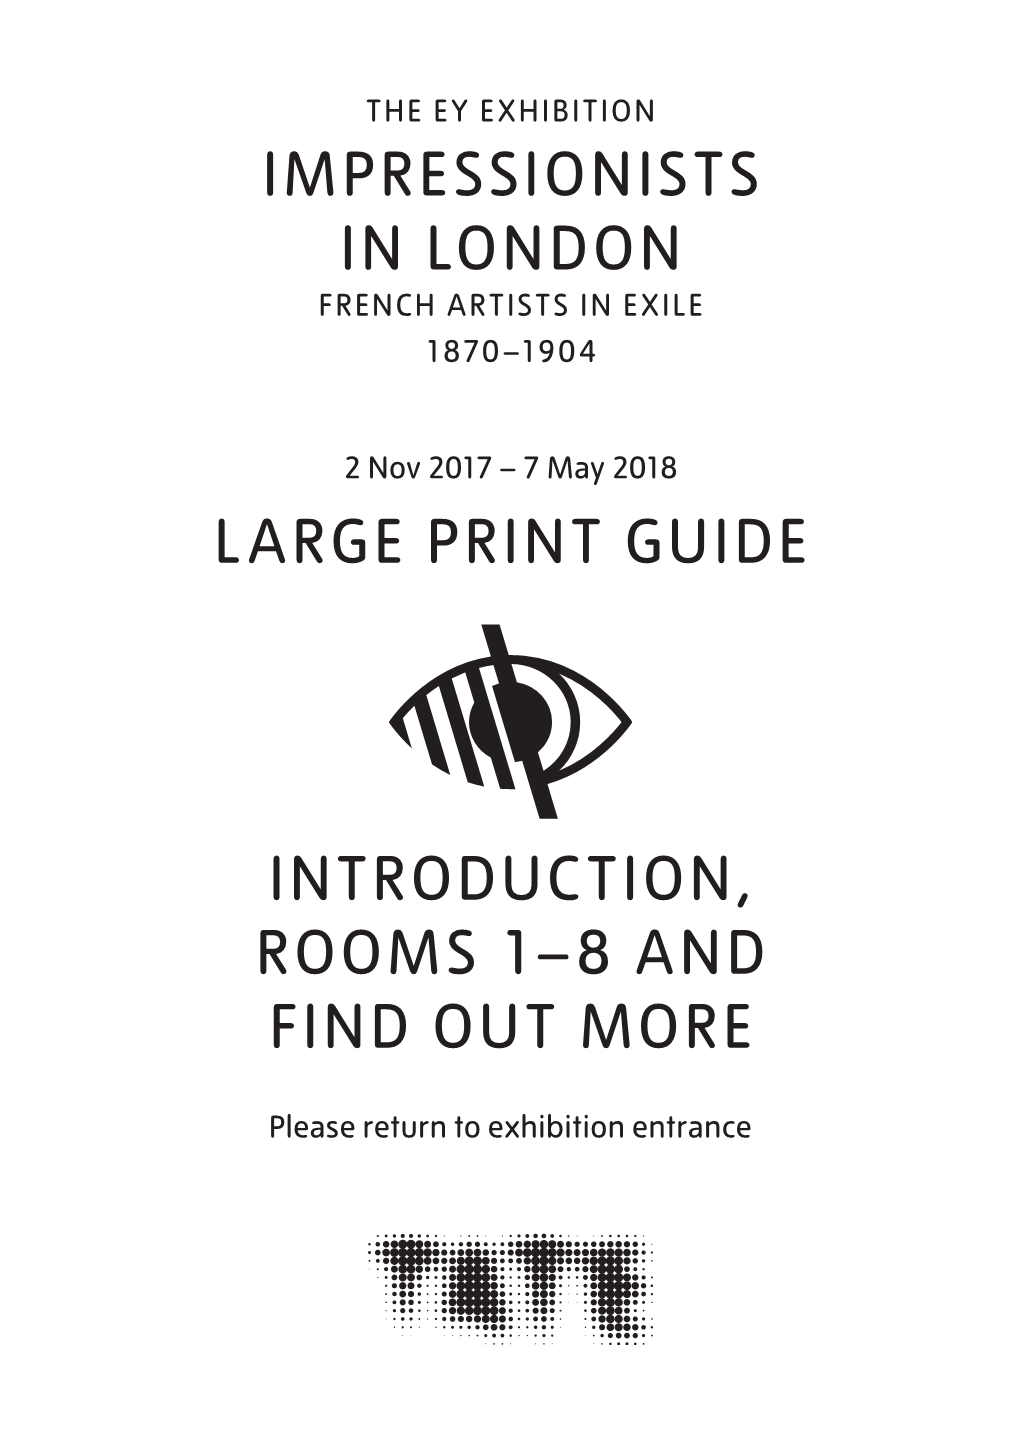 Download the Large Print Guide